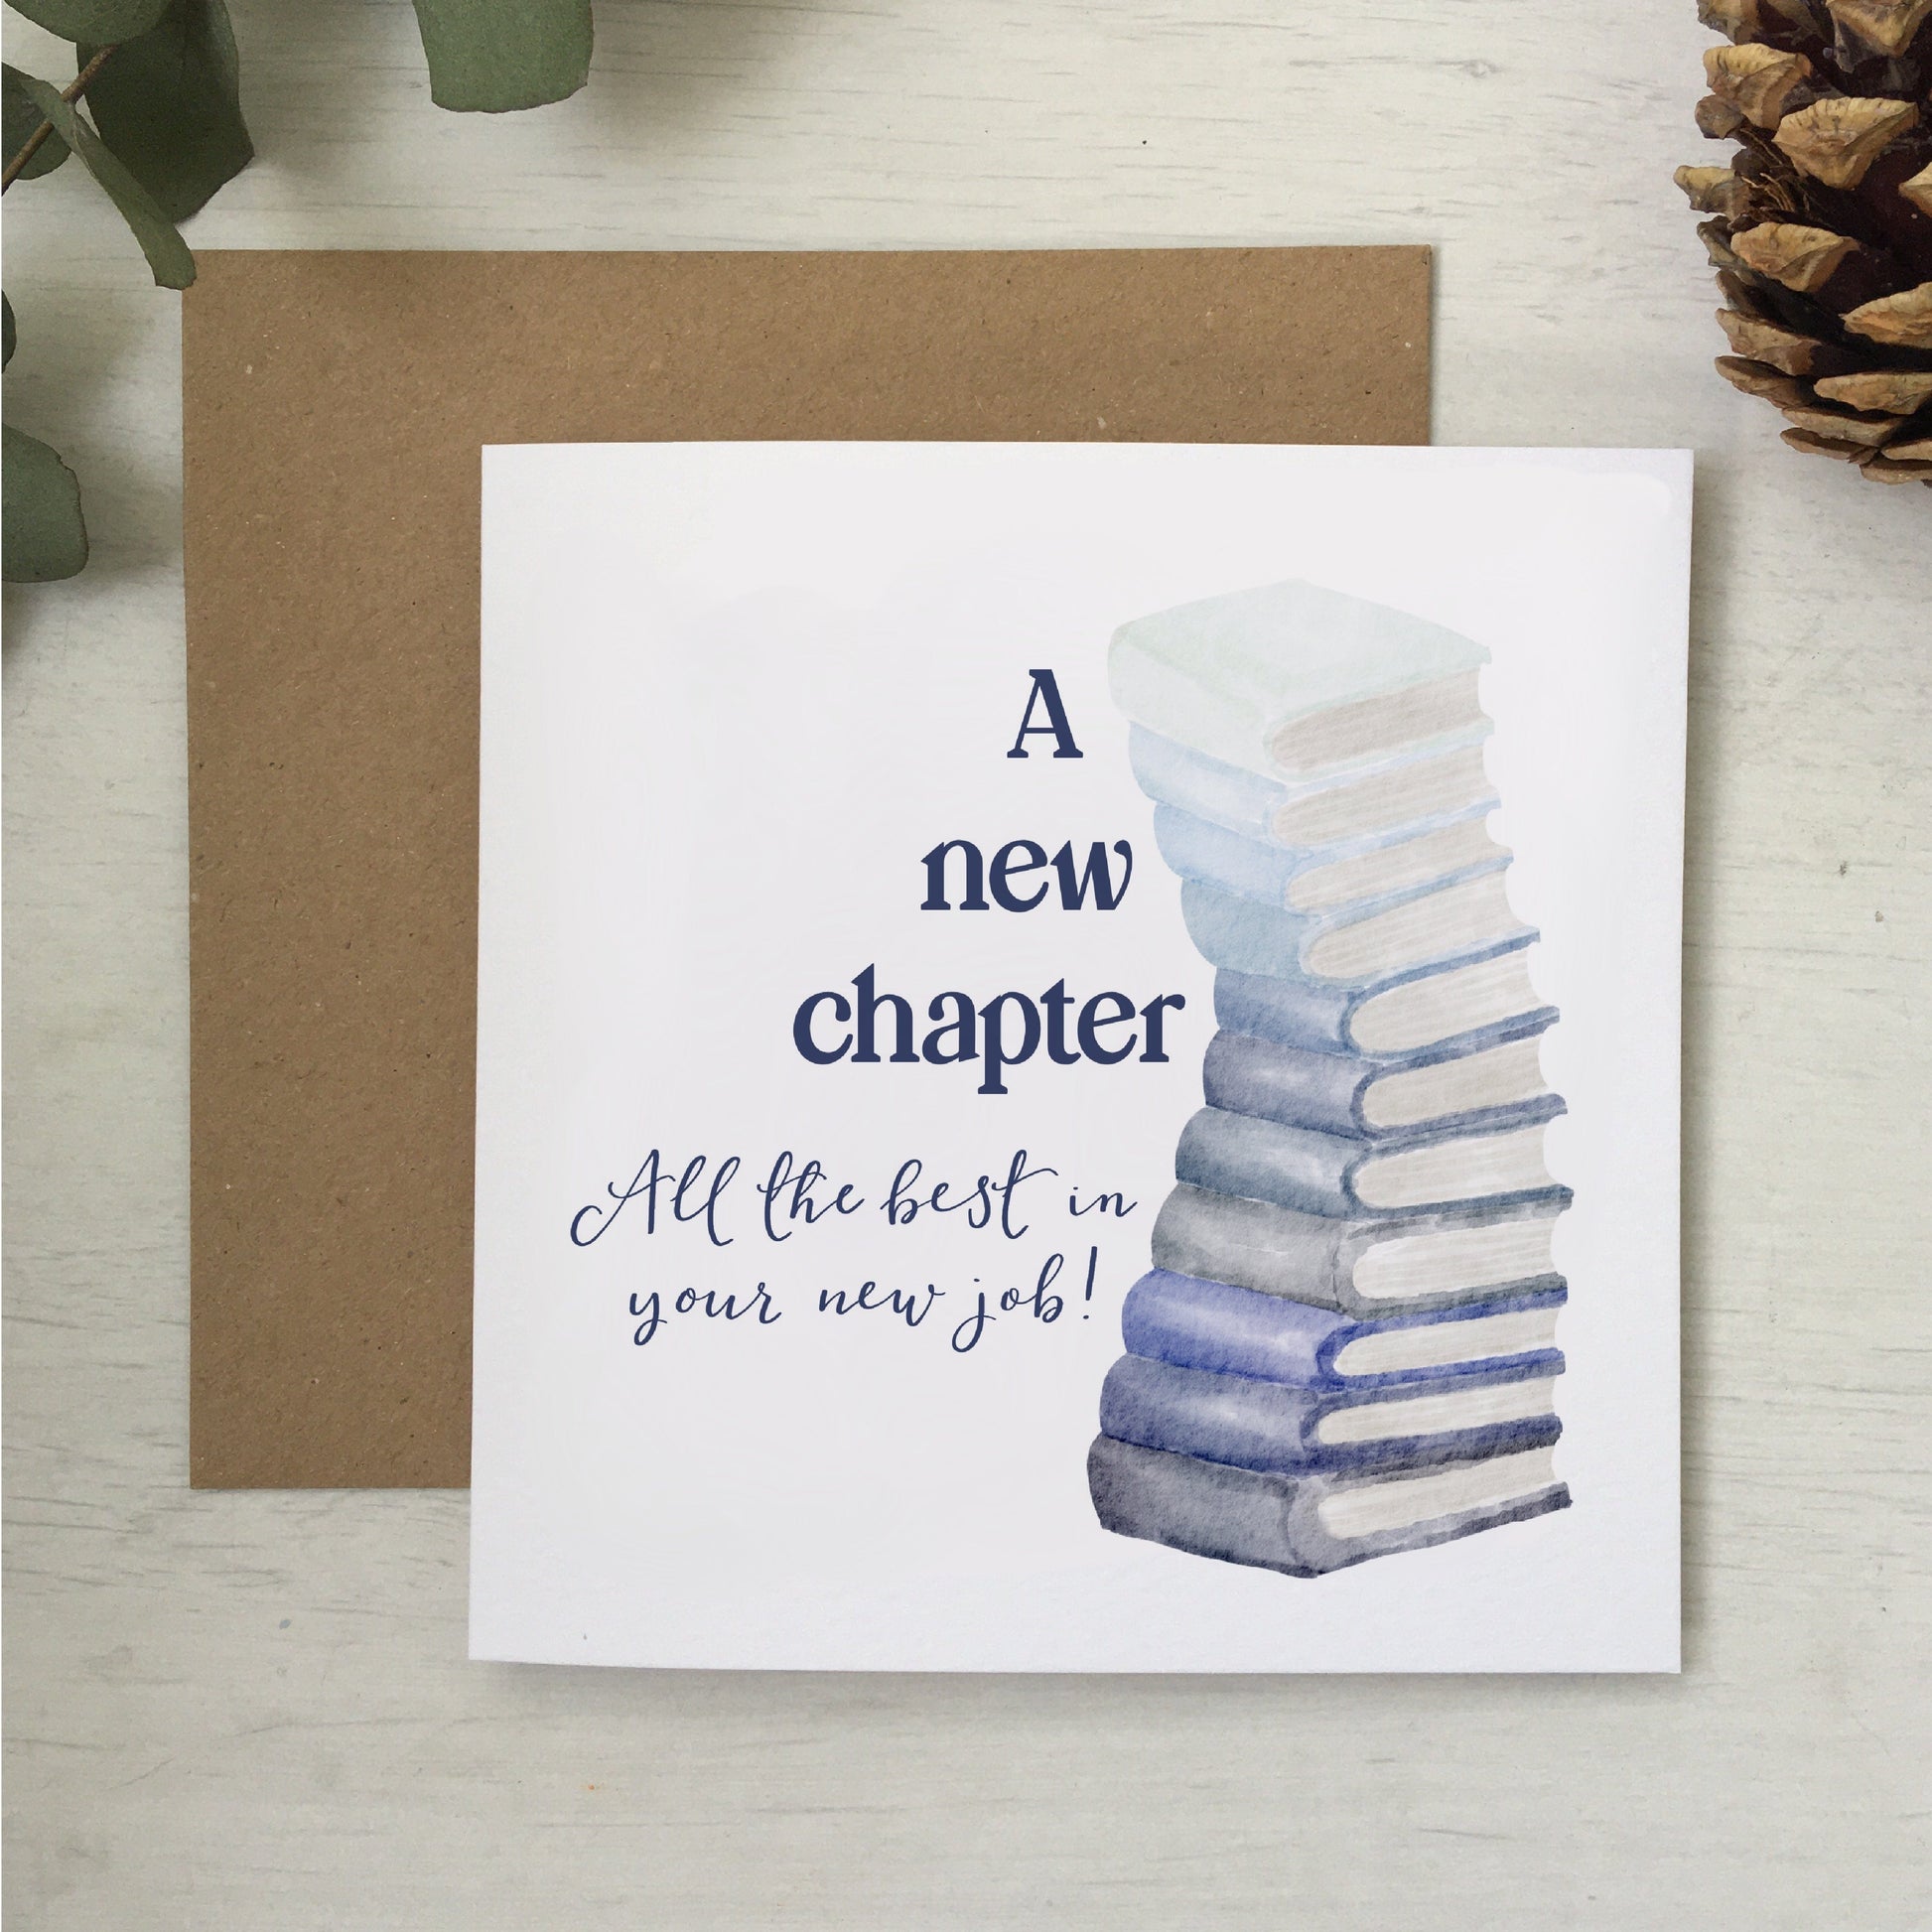 And Hope Designs Cards New job card - a new chapter